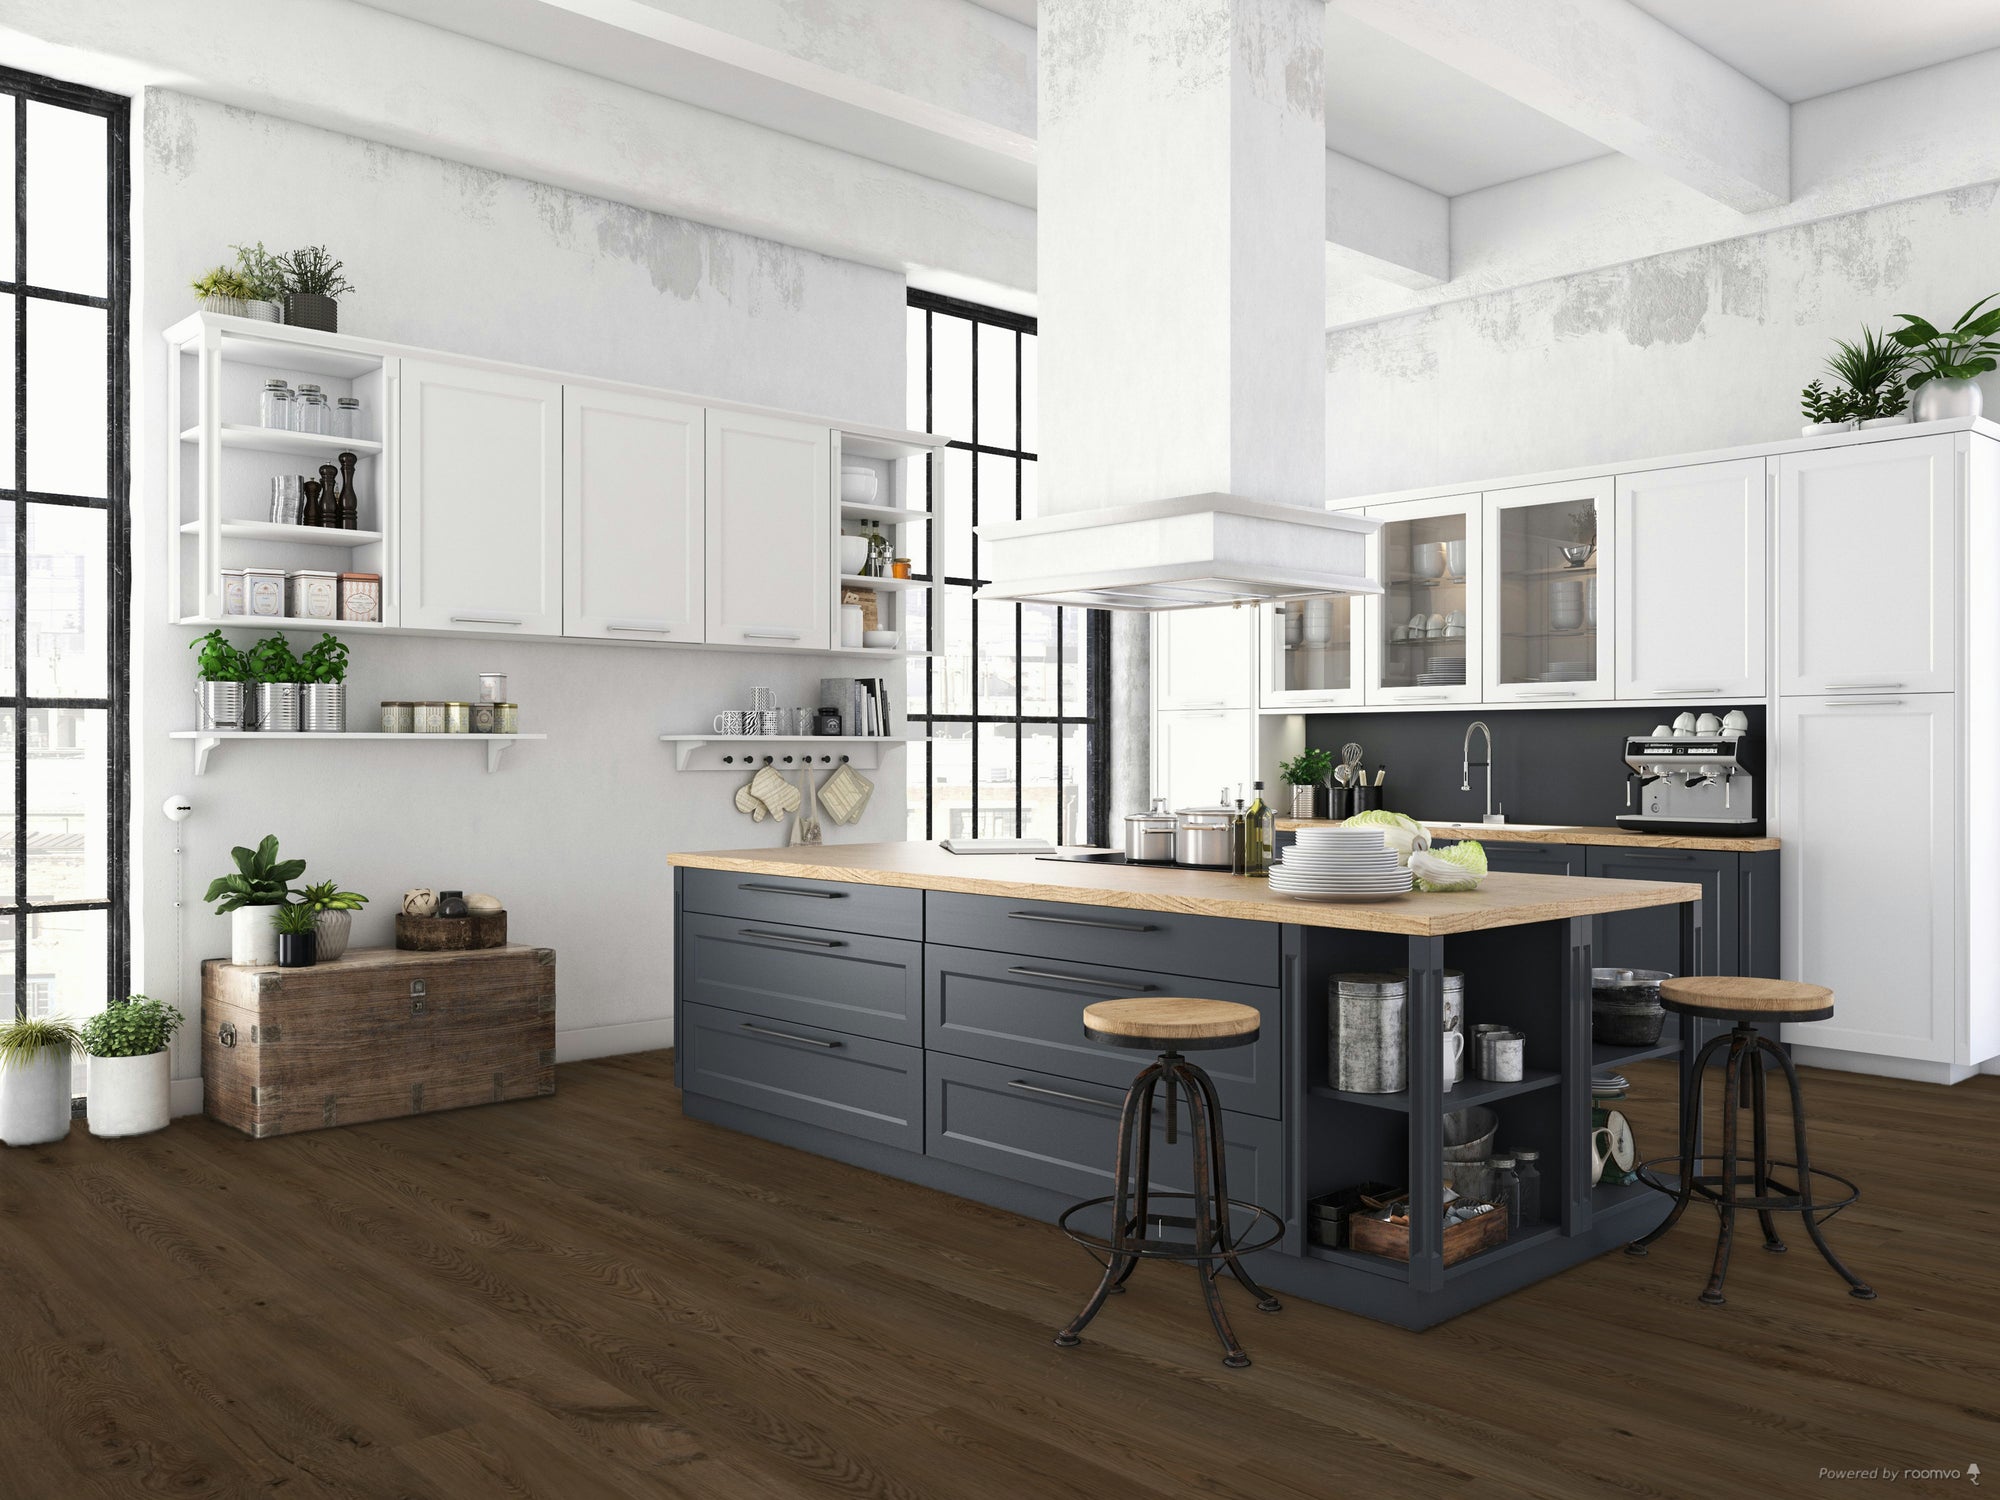 Engineered Floors - Nurture Collection - 7 in. x 48 in. - Timber